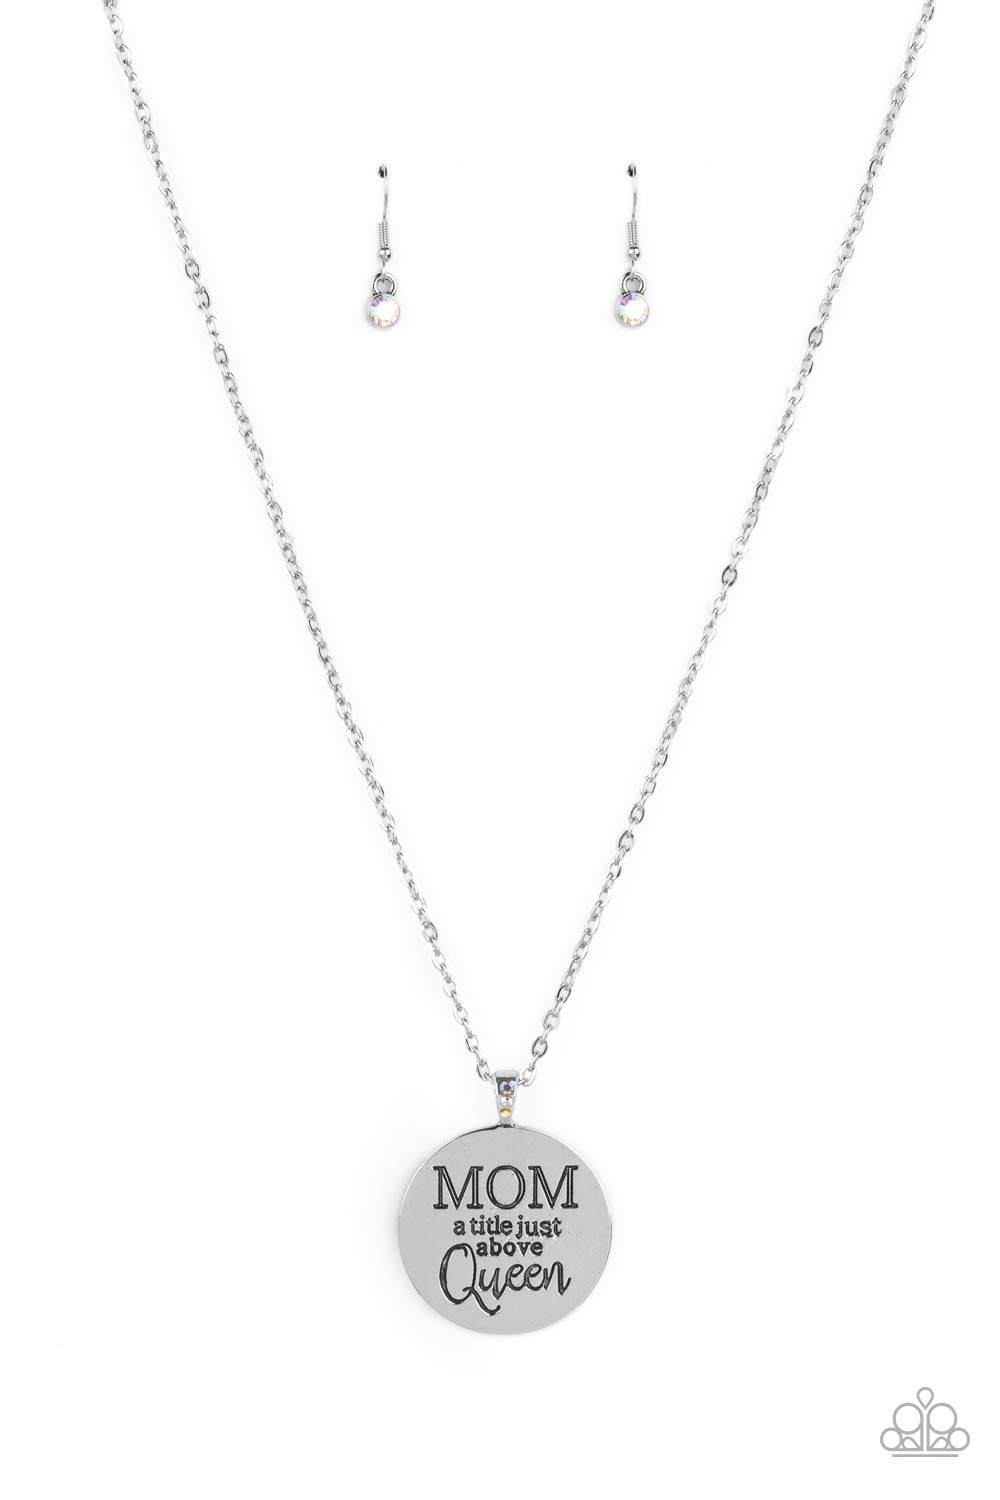 Mother Dear - Multi Iridescent Rhinestones/"MOM a title just above Queen" Pendant Paparazzi Necklace & matching earrings